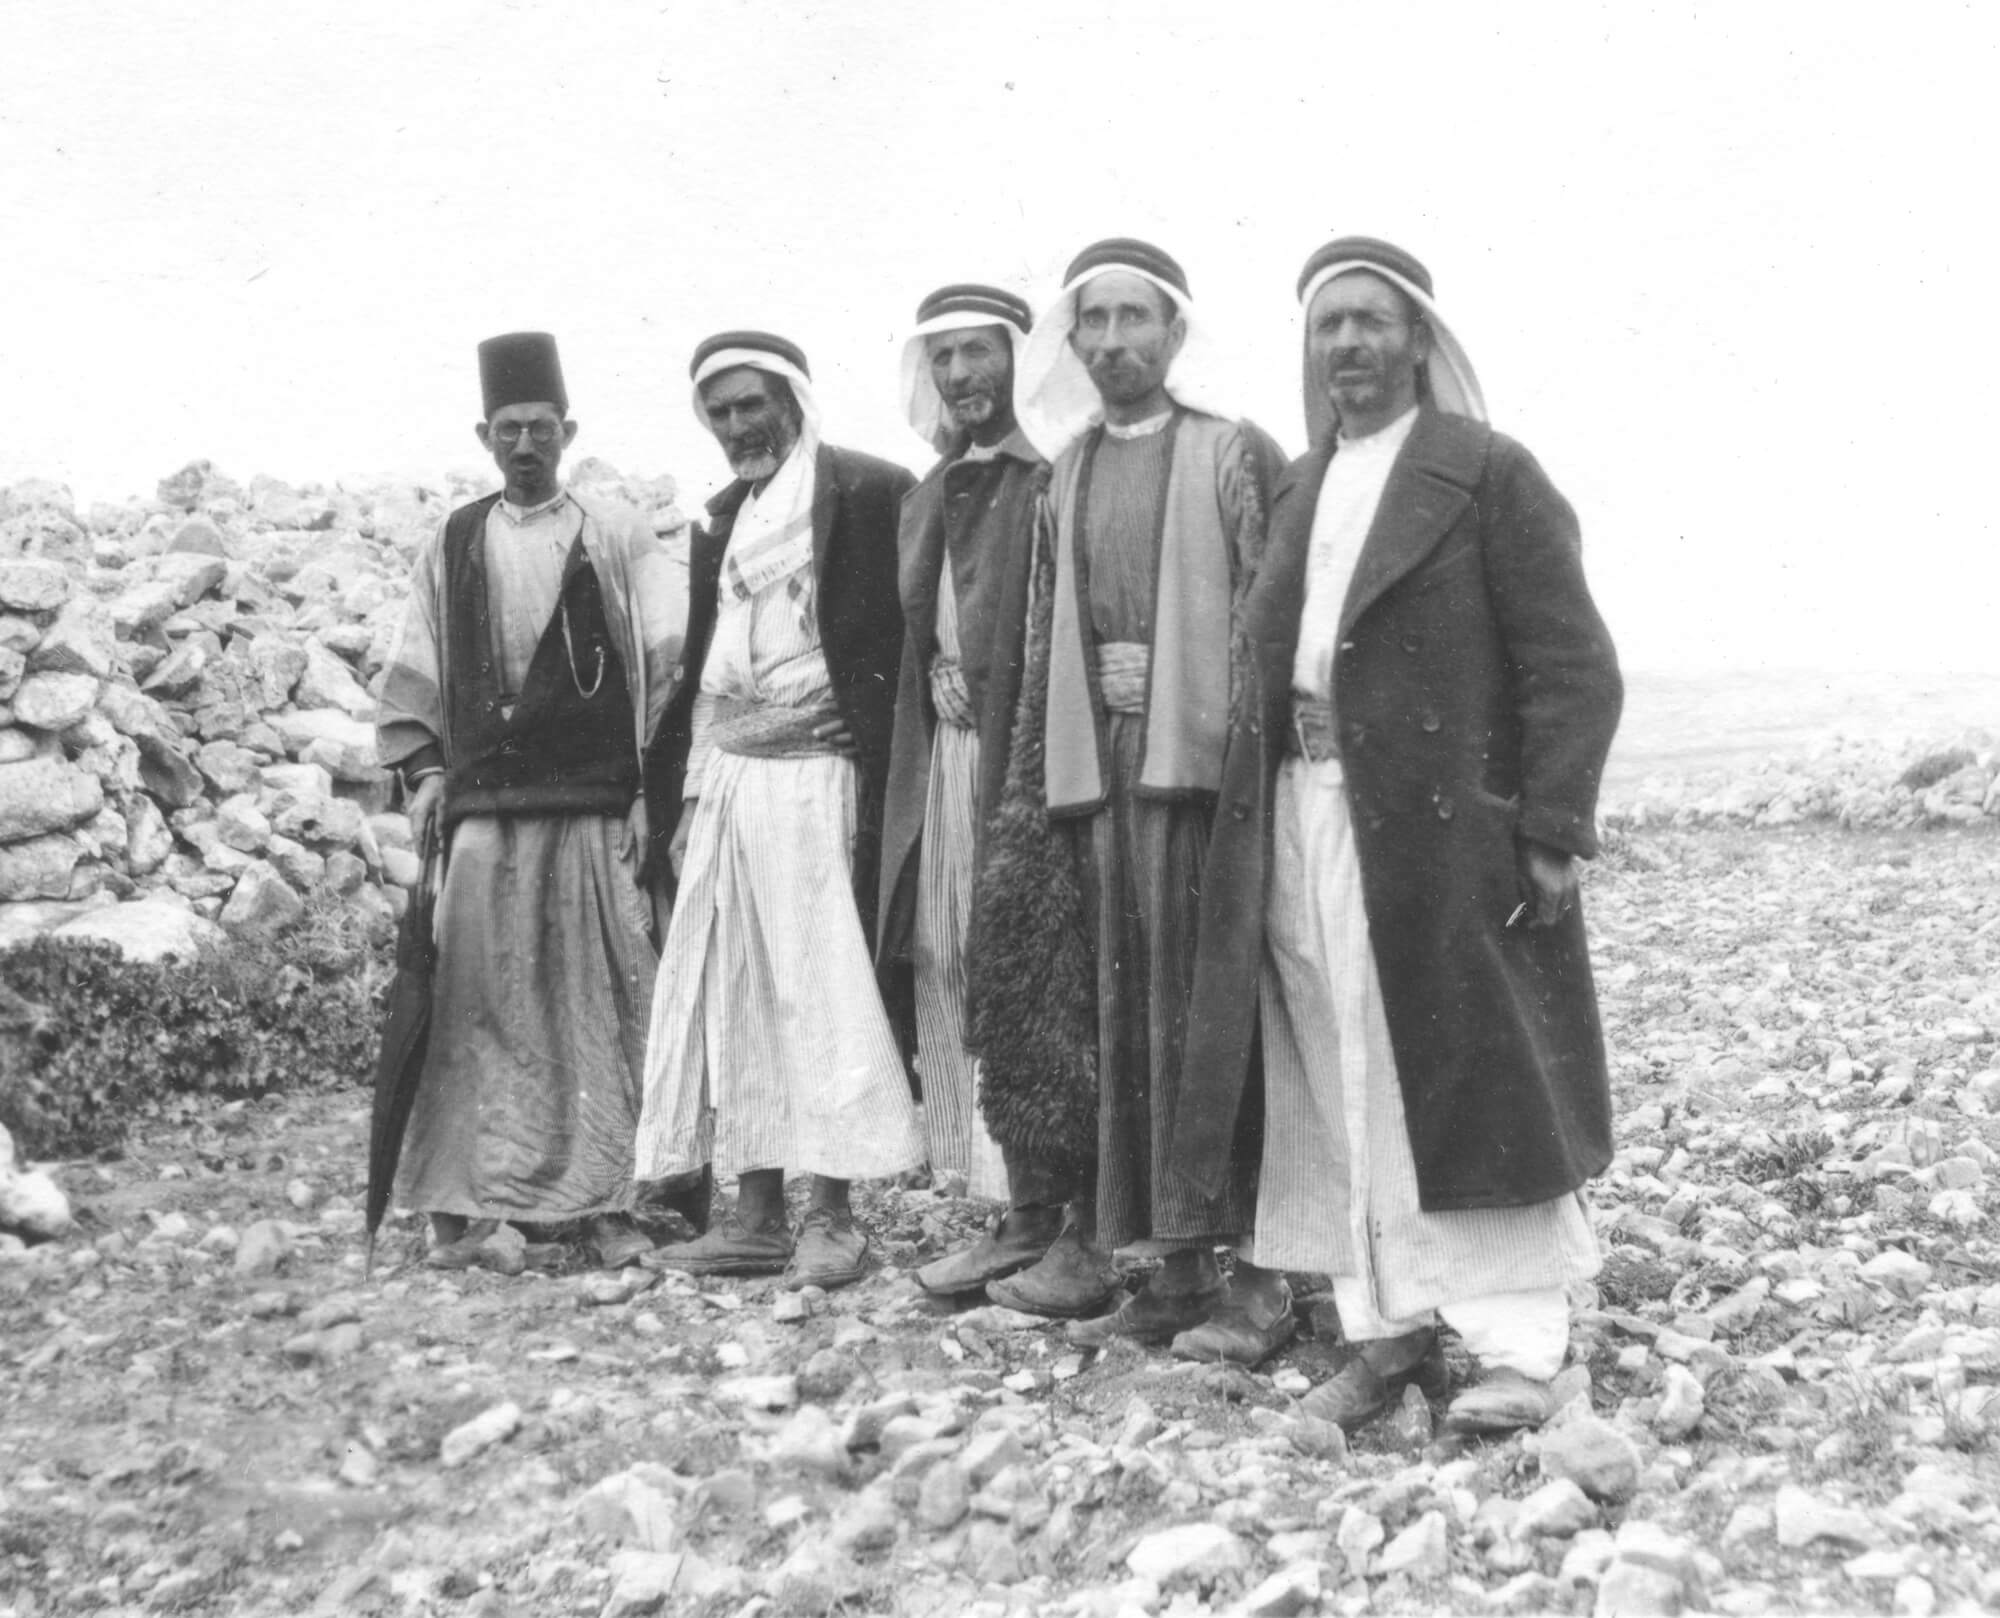 Figure 4. Landowners of El Bireh from whom parcels were rented for excavating the site of Tell en-Naṣbeh, 1929. Badè Museum photographic archive A581a. Photographic negative. Courtesy of the Bade Museum, Pacific School of Religion.